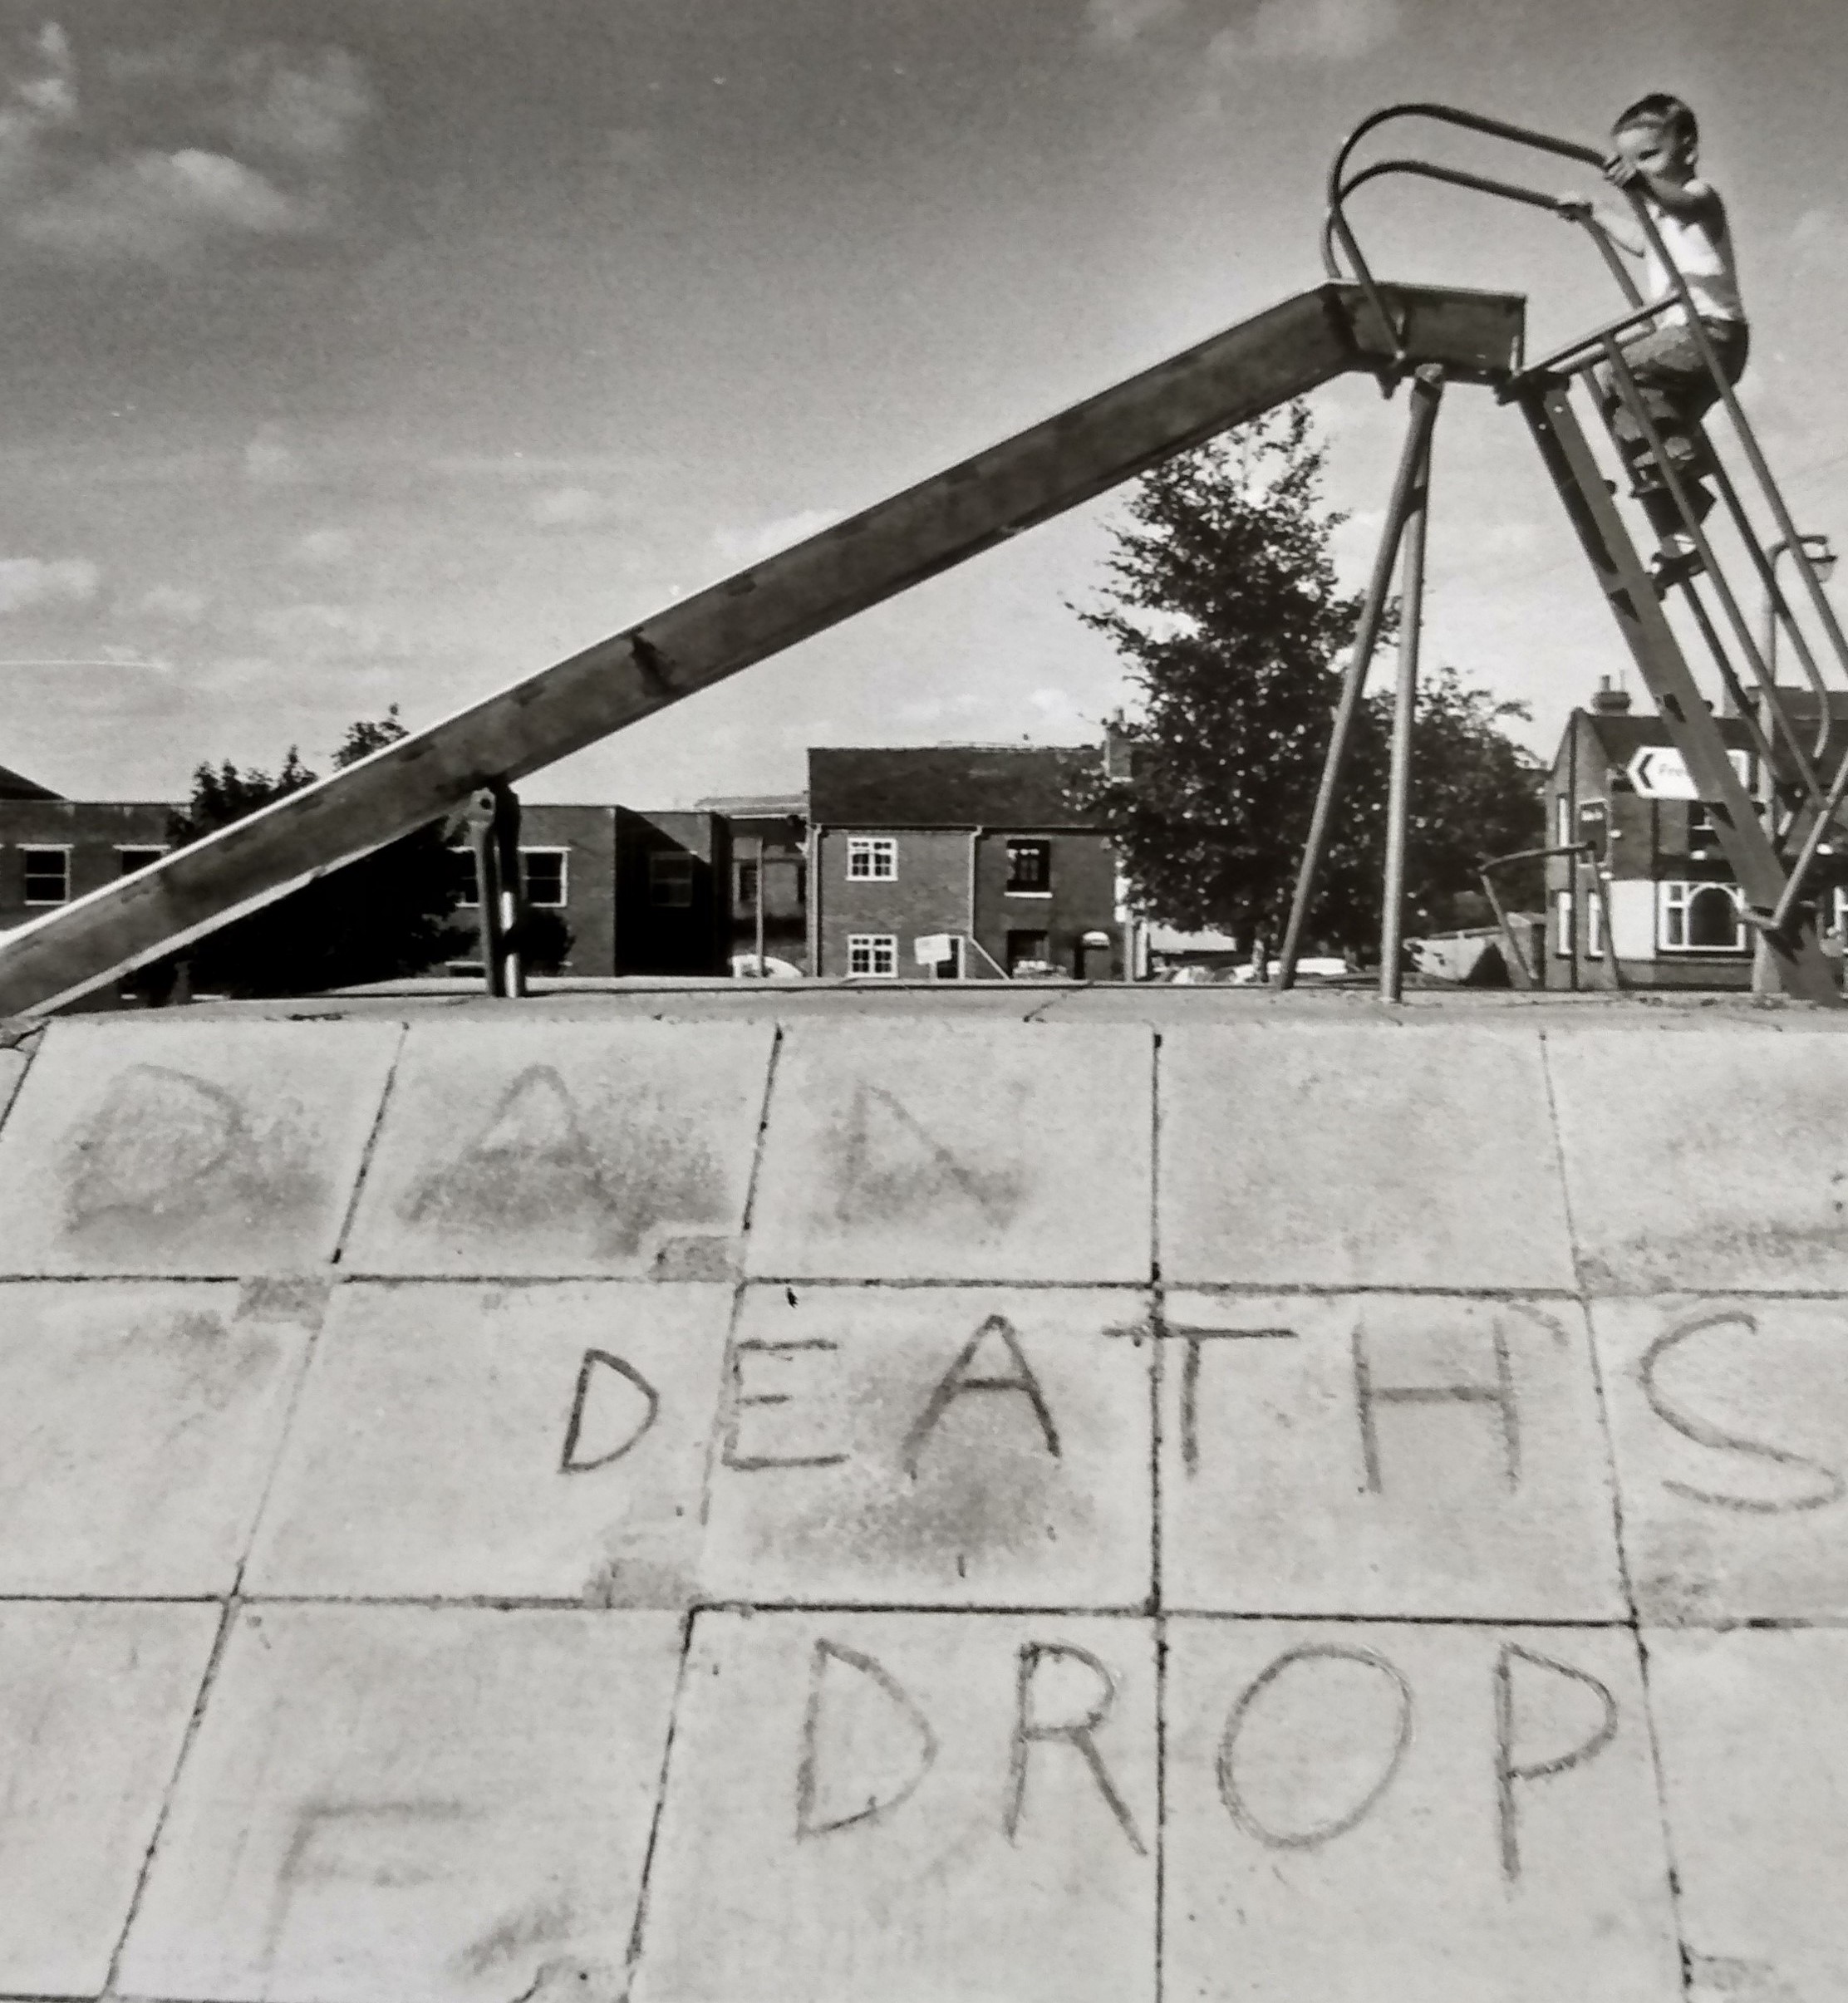 It’s September 1980 and the city council has come under attack from the National Playing Fields Association for one its children’s play slides, dubbed by users “Death’s Drop”.